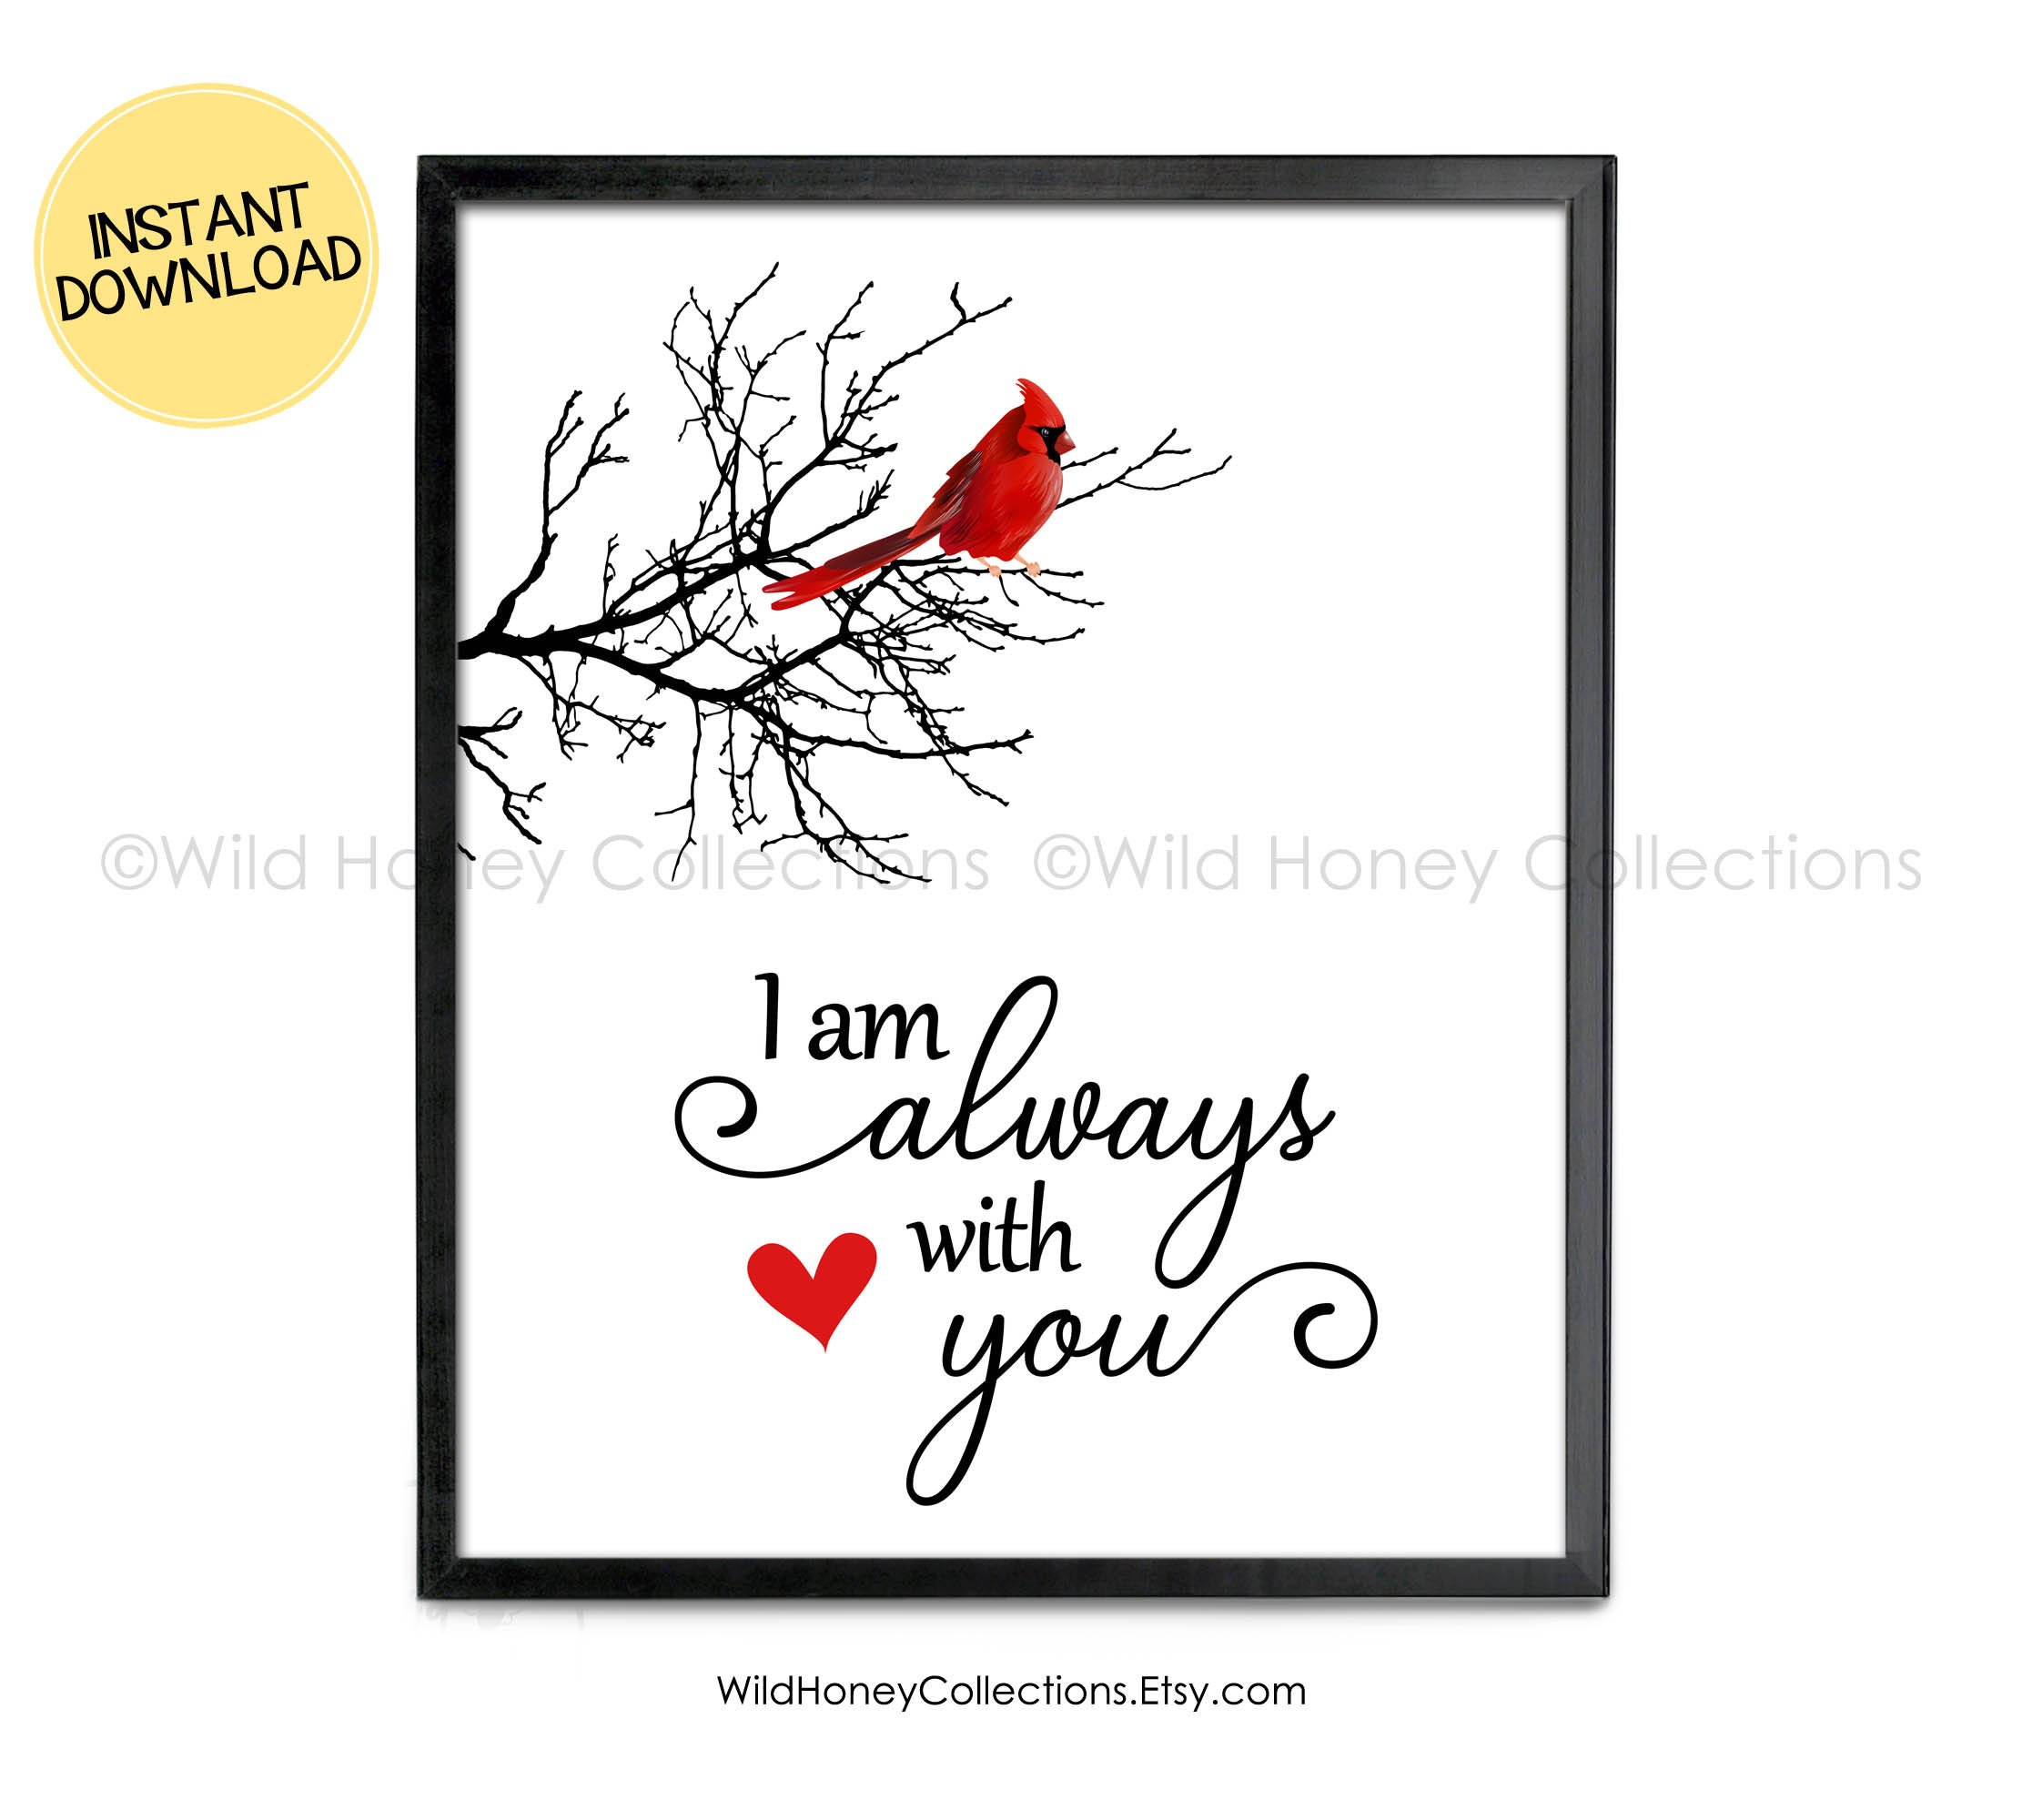 Quote Art Instant Download Printable Art don't you know you are a wildflower Oh honey